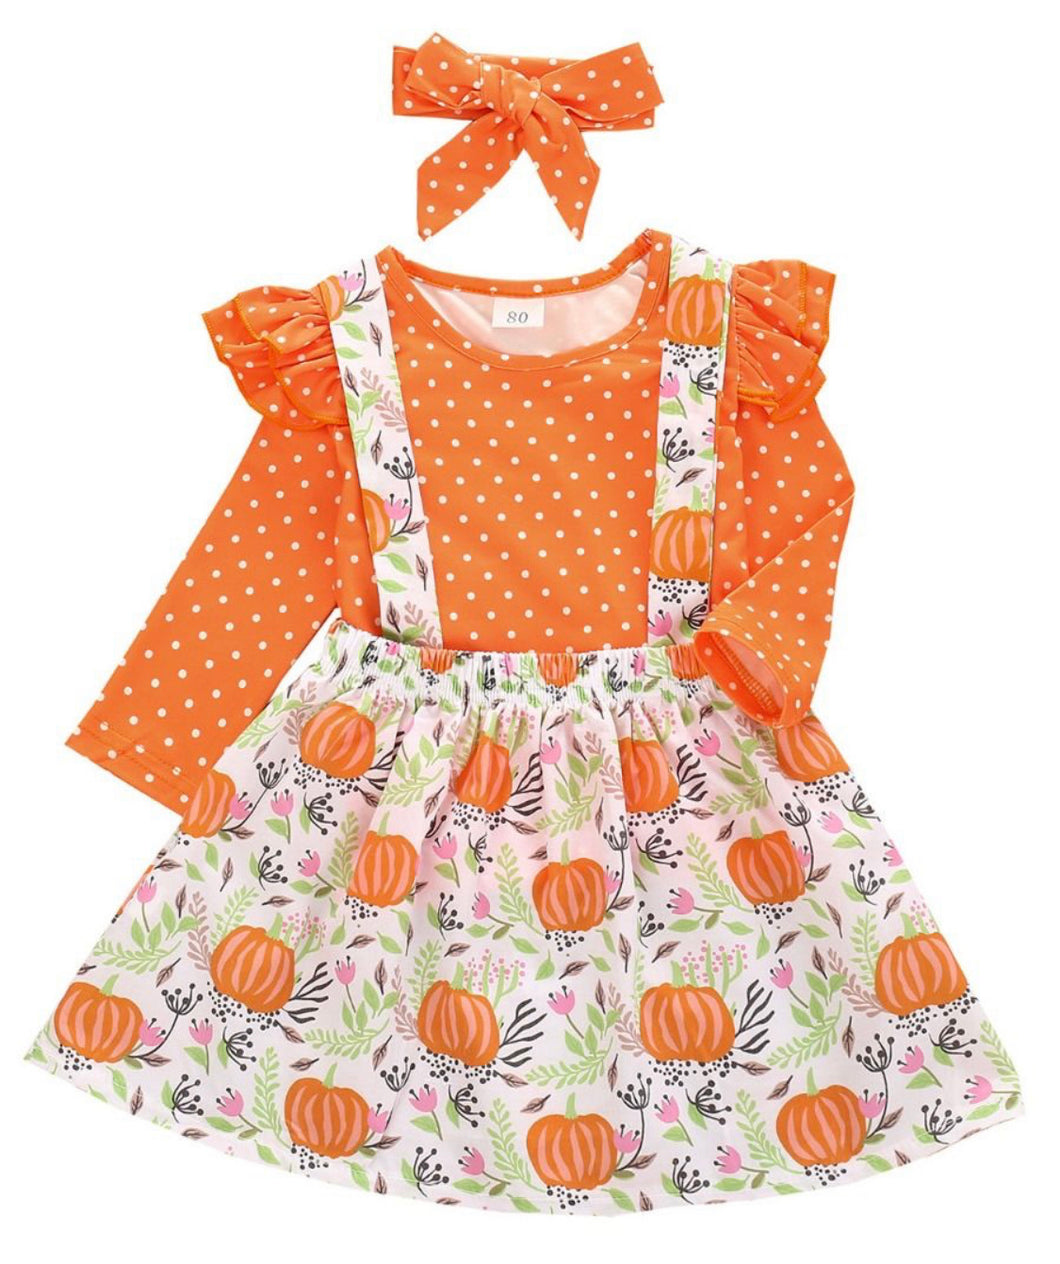 Girls halloween outfit - orange and white